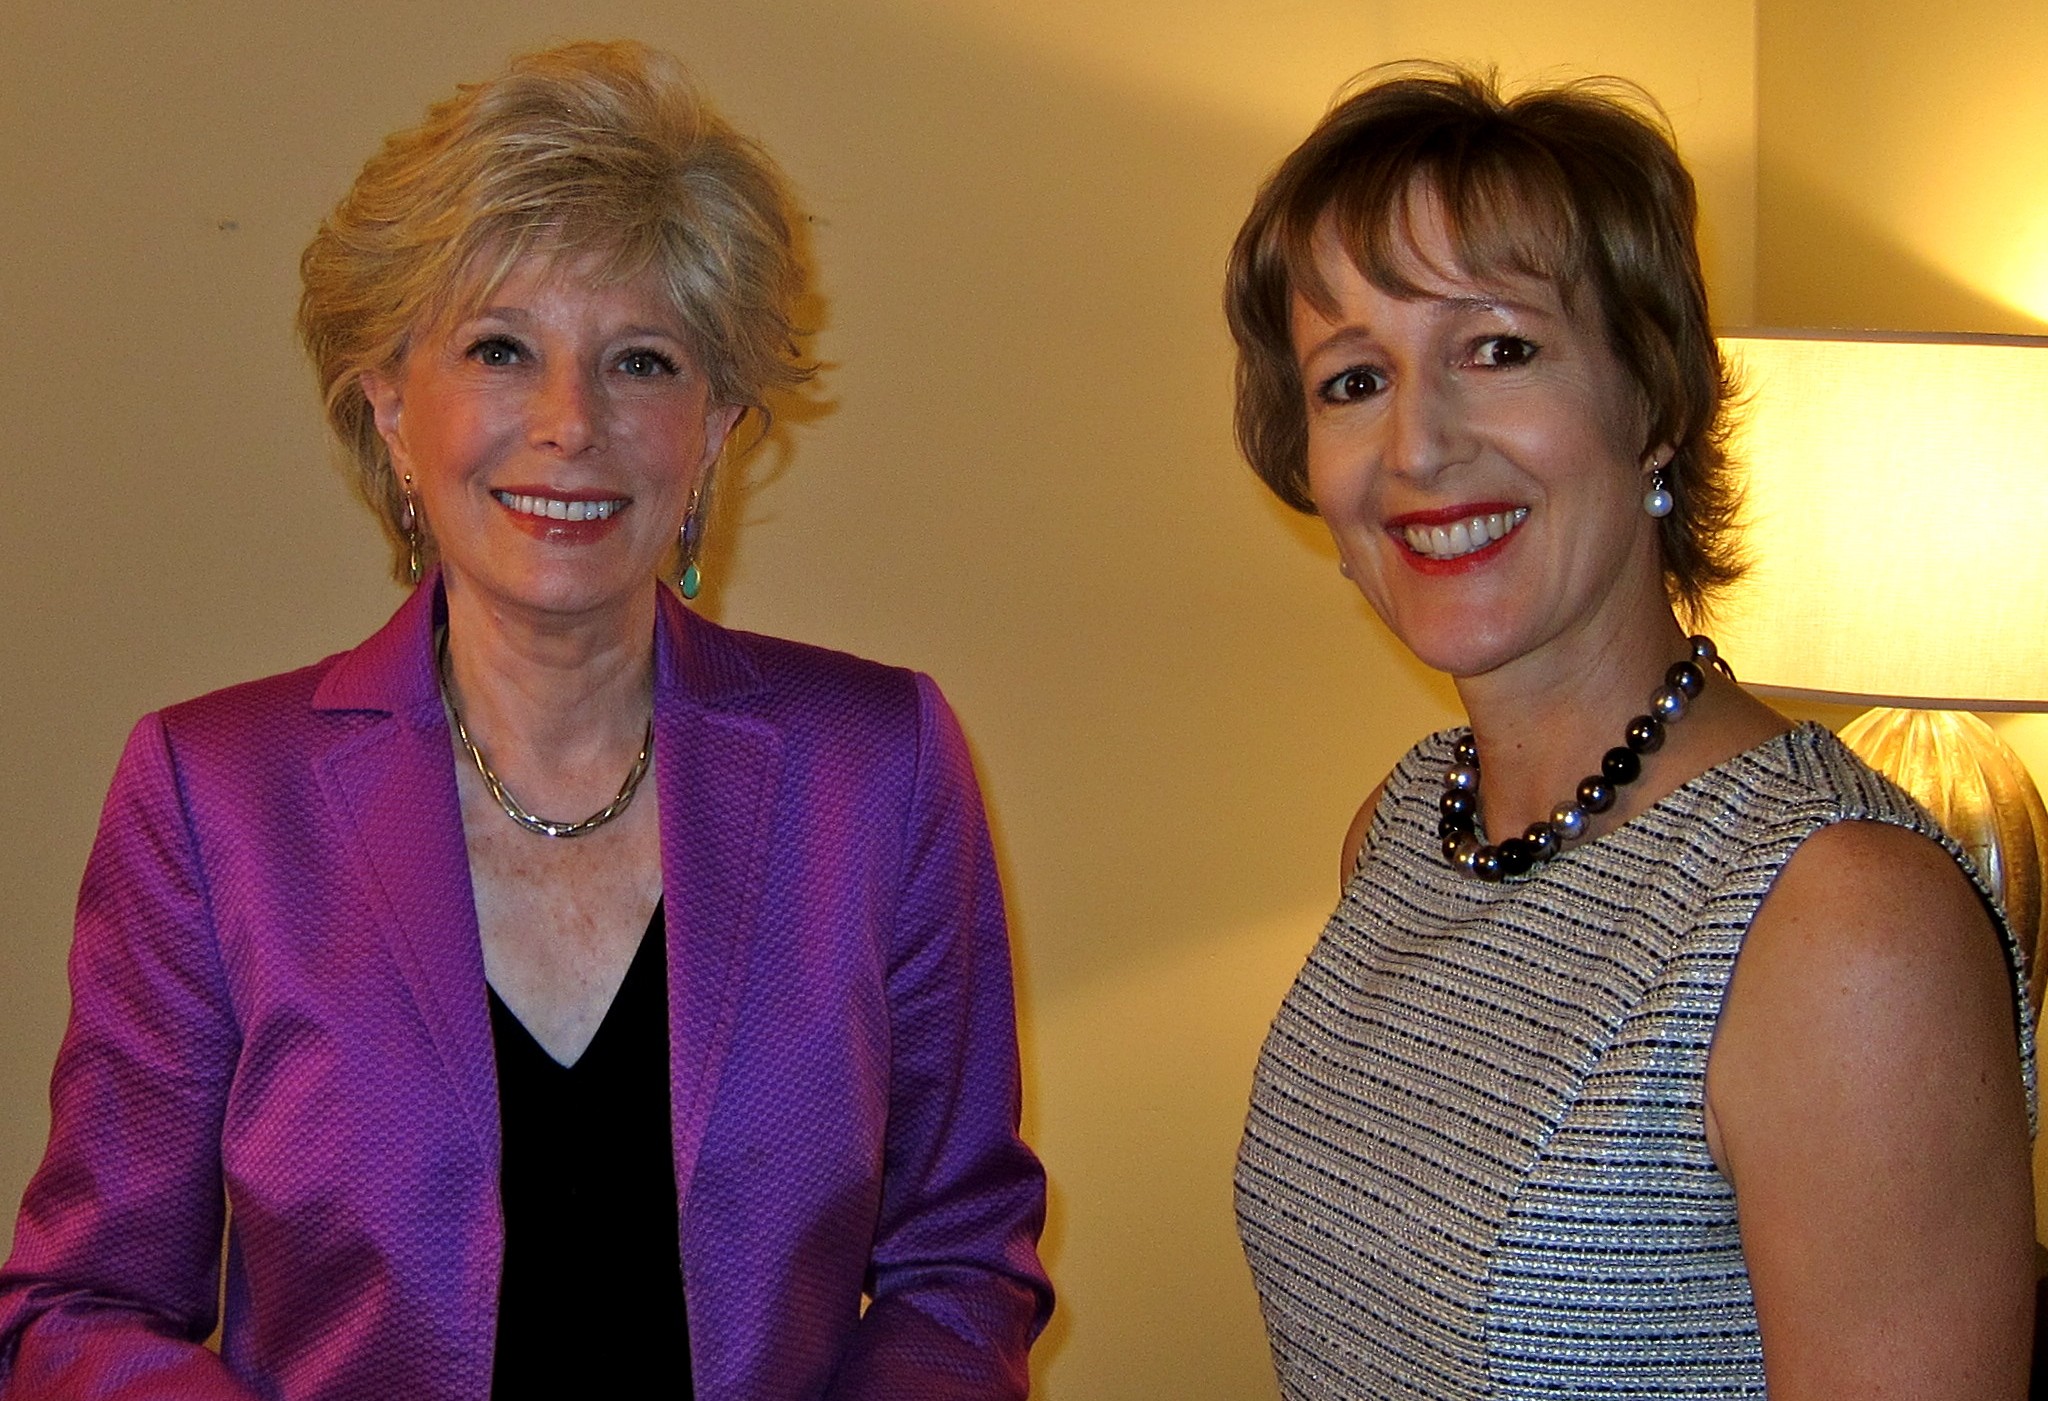 Lesley Stahl on Barbara Walters: Why They’re Soul Sisters